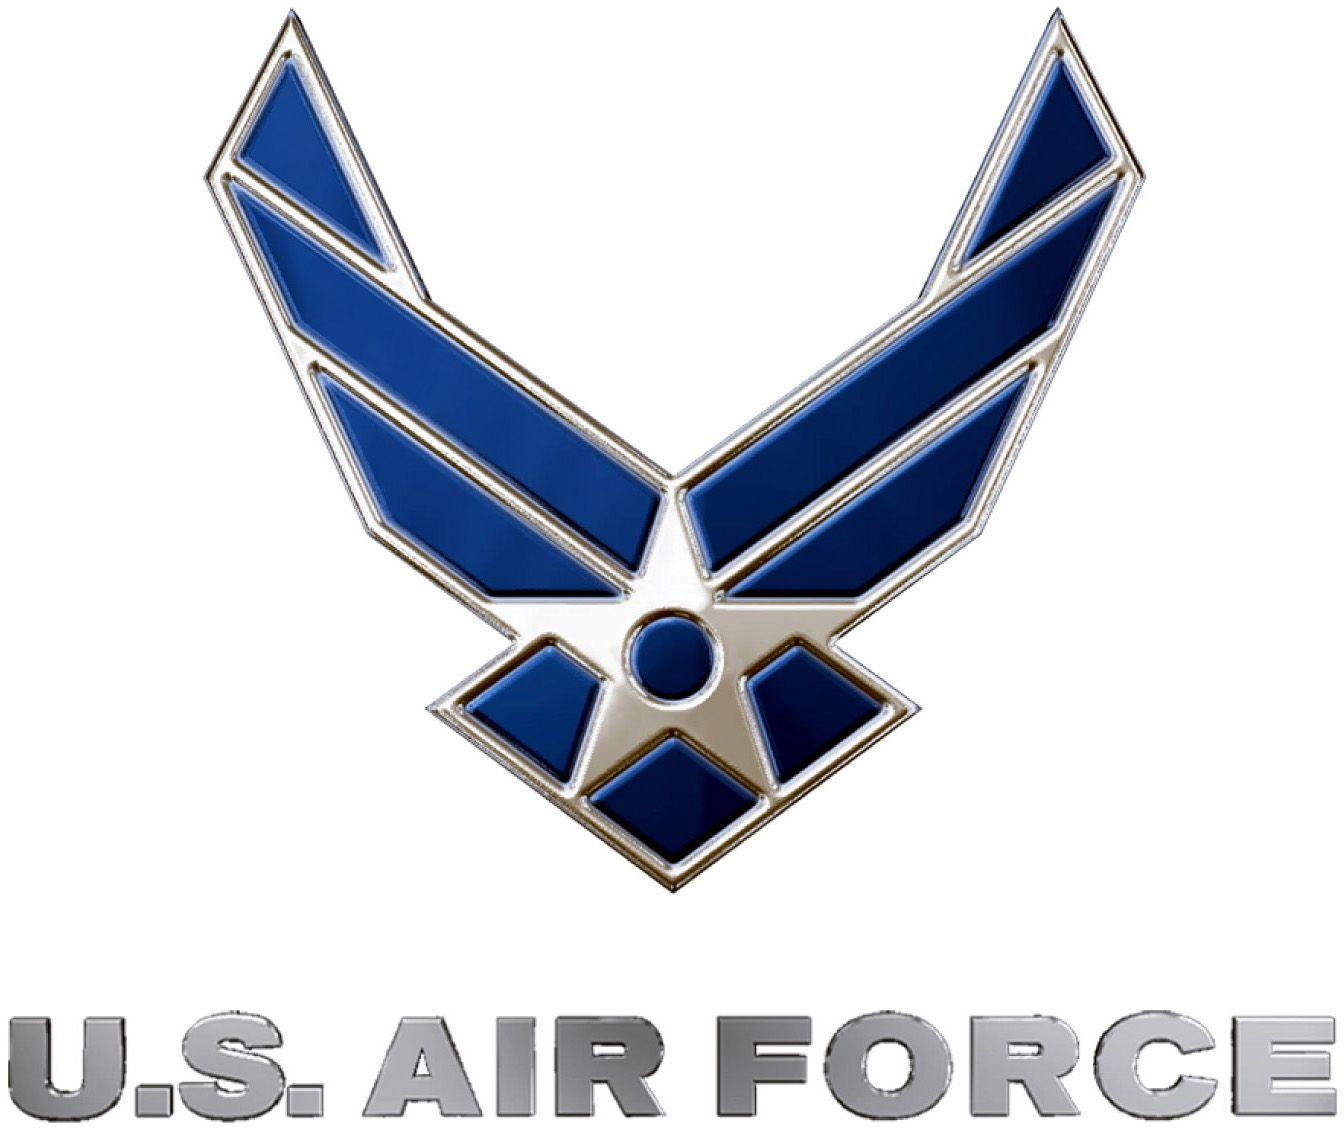 Blue Air Force Logo - File:United States Air Force logo, blue and silver.jpg - Wikimedia ...